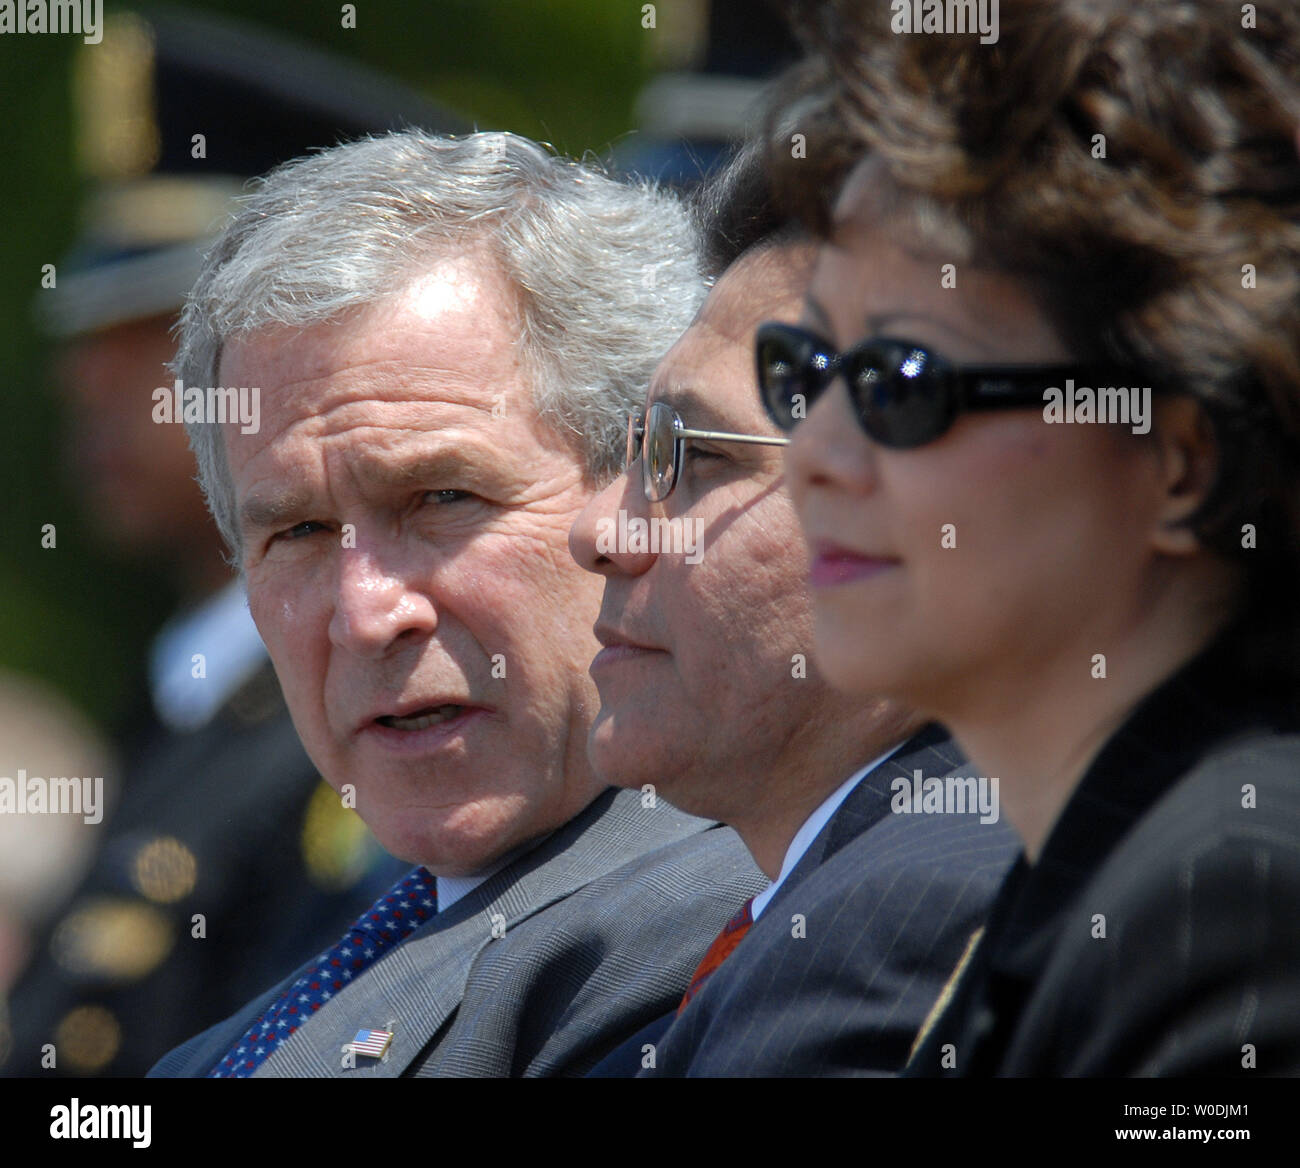 U.S. President George W. Bush, Attorney General Alberto Gonzales and Transportation Secretary Elaine Chao (L to R) attend the Annual Peace Officers' Memorial Service on the lawn of the U.S. Capitol in Washington on May 15, 2007.    (UPI Photo/Roger L. Wollenberg) Stock Photo